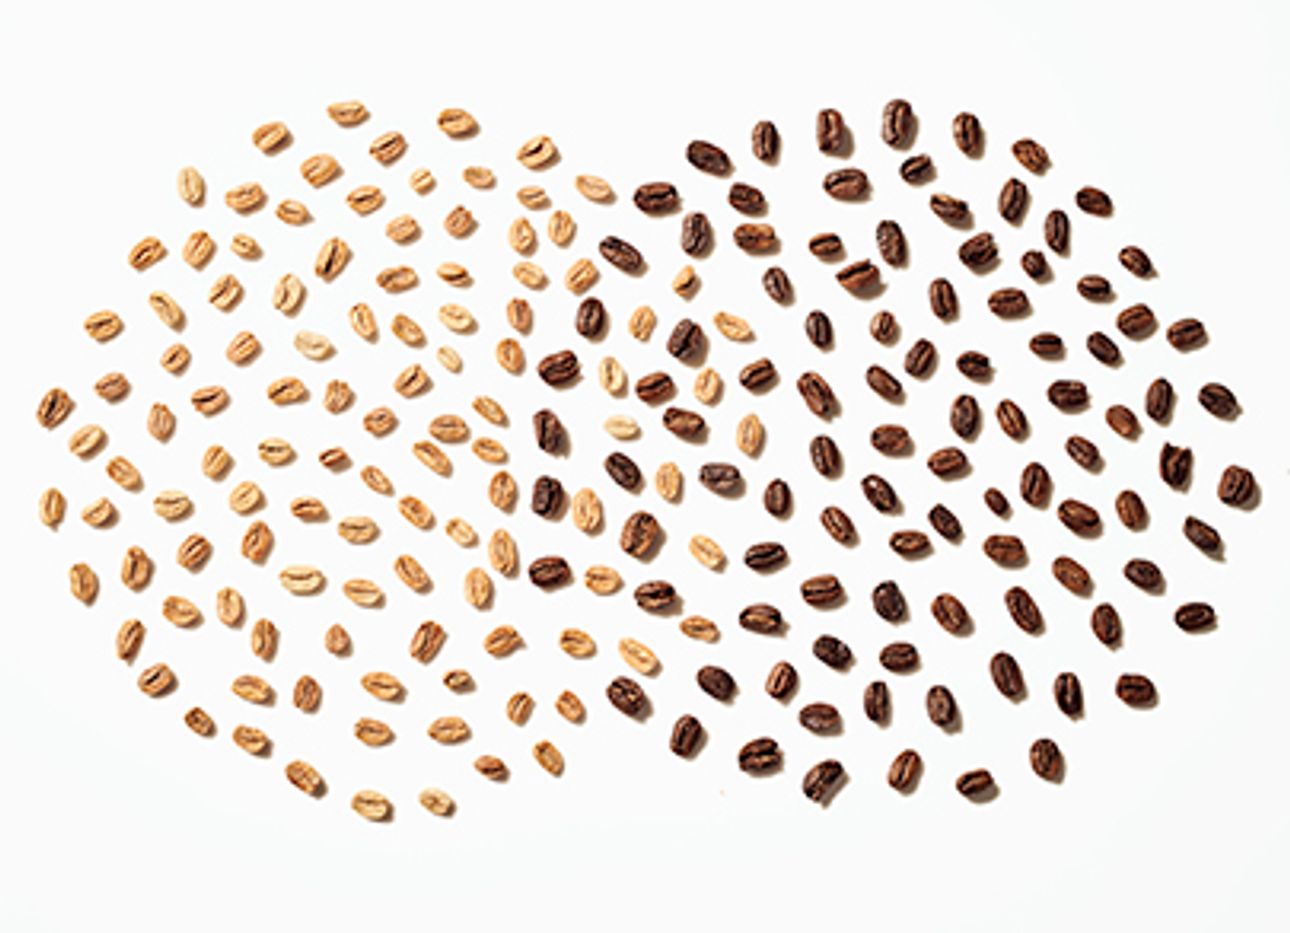 Unroasted and roasted coffee beans arranged in two, overlapping circles.